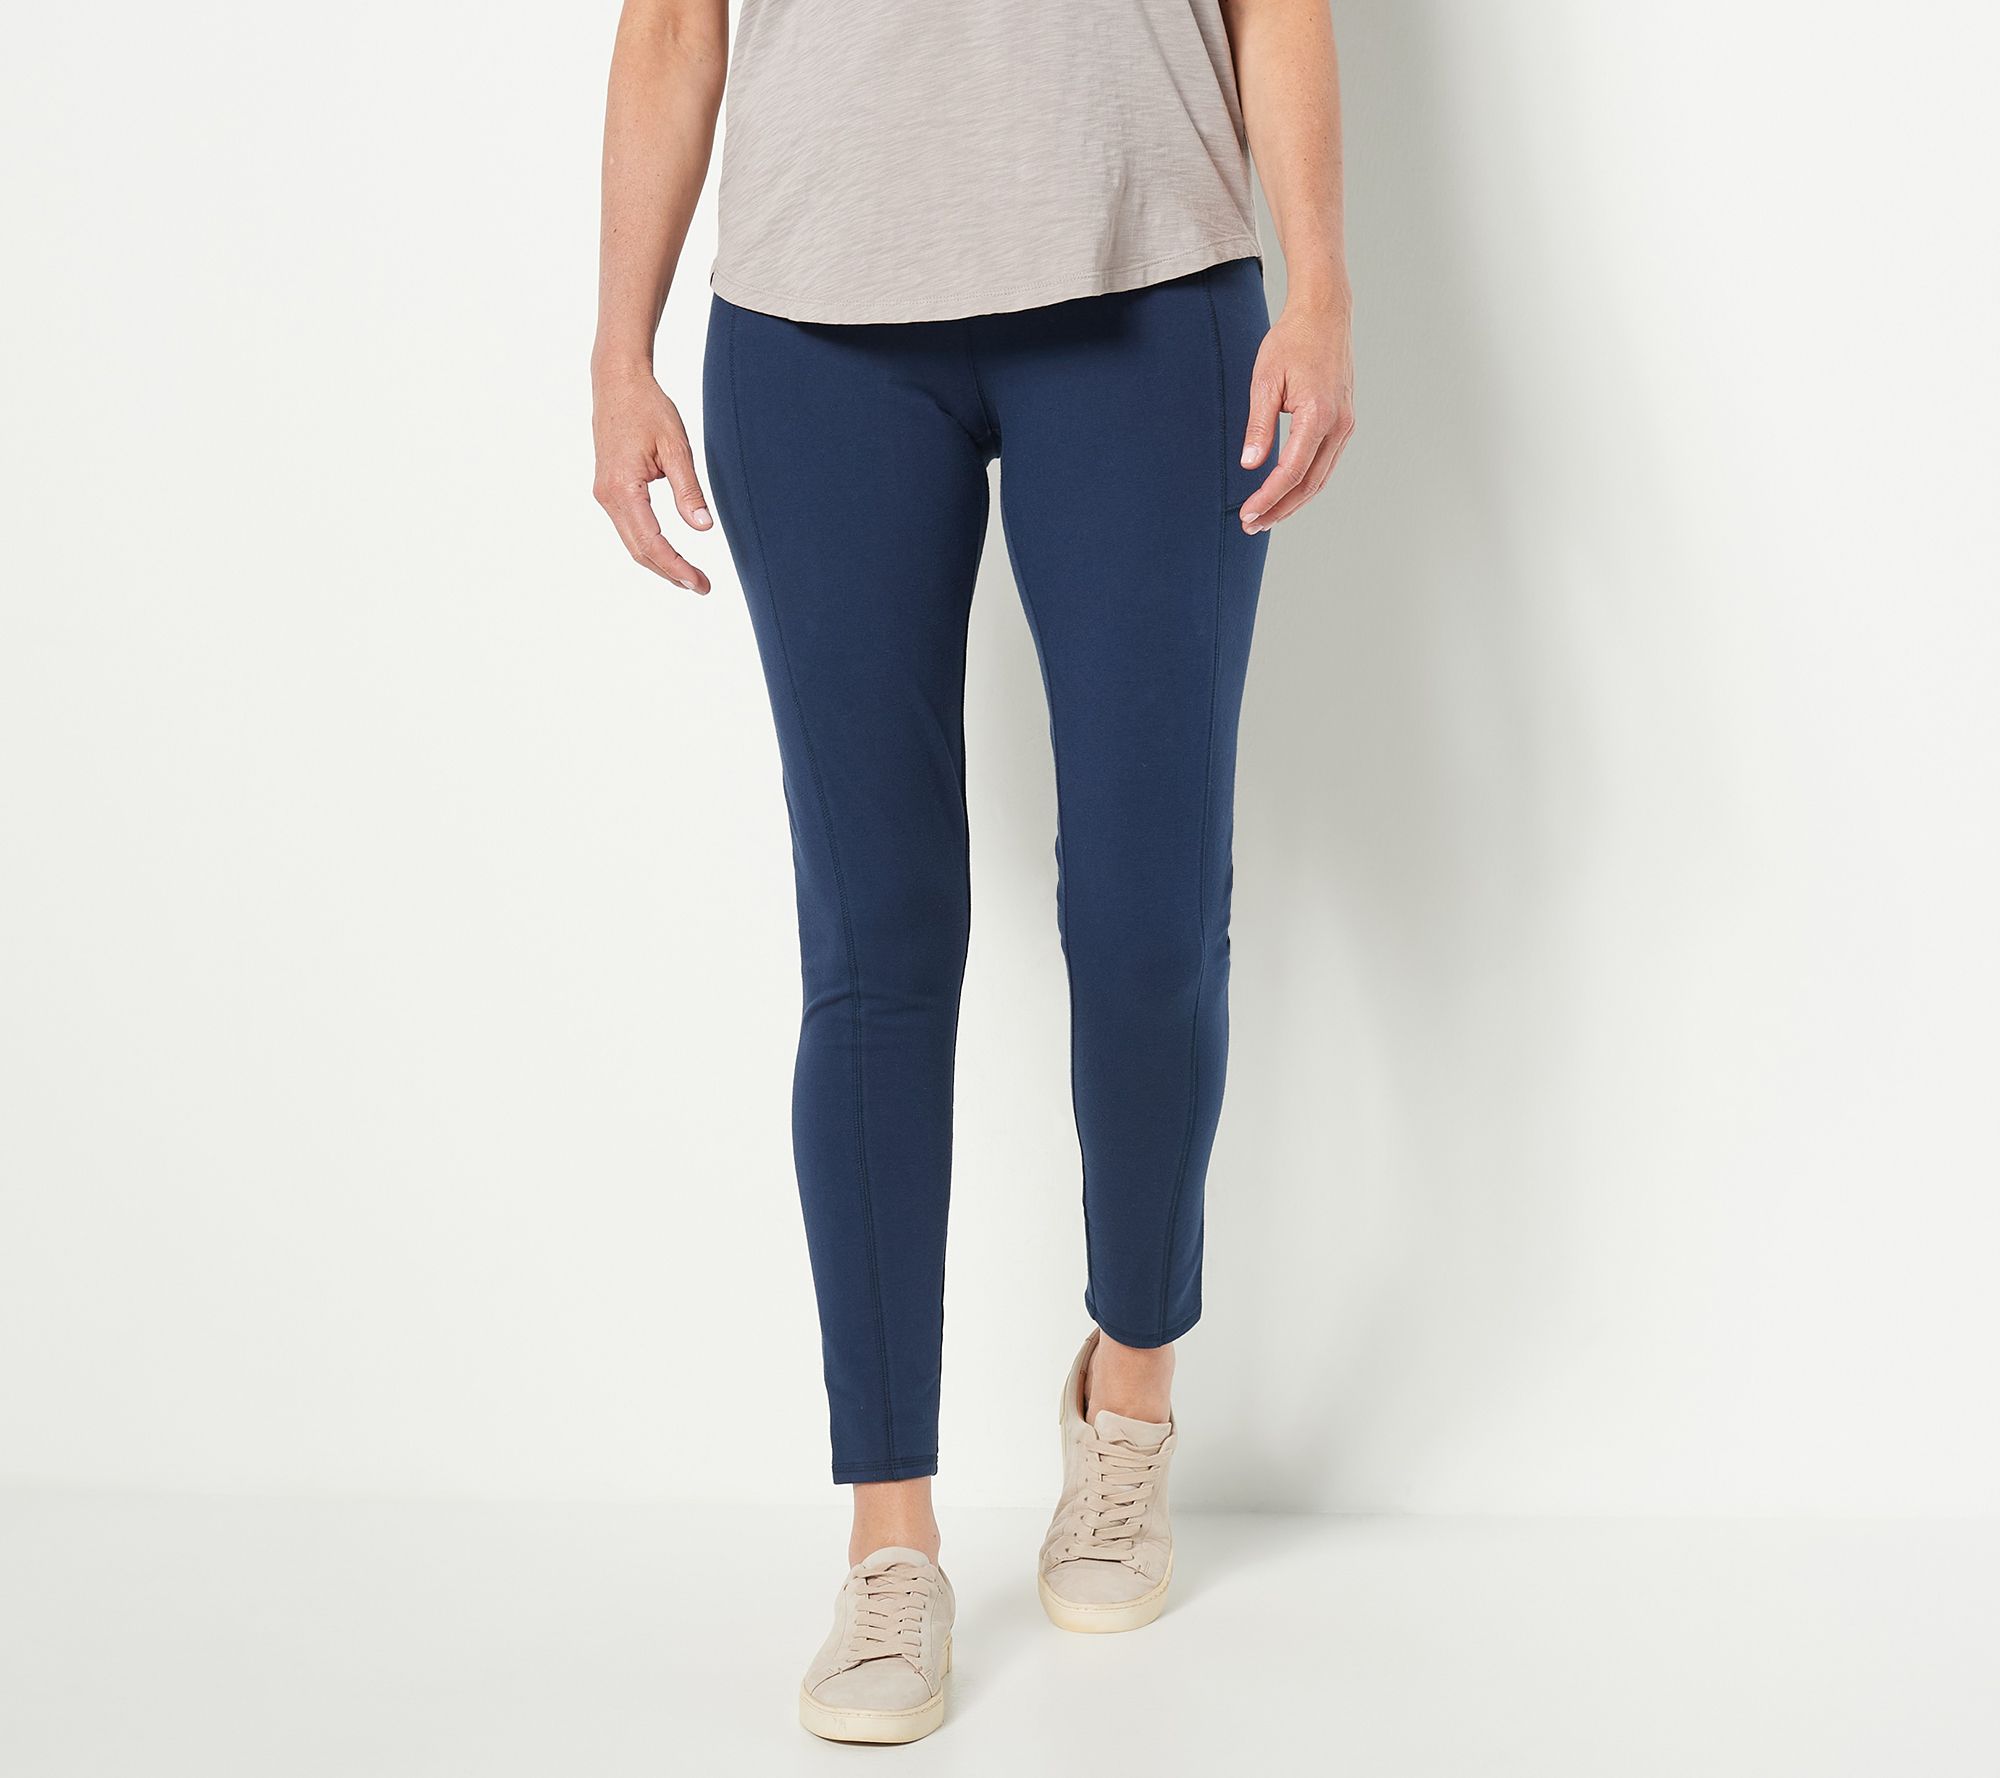 Denim & Co. Active Regular Duo Stretch Pant with Side Pocket 